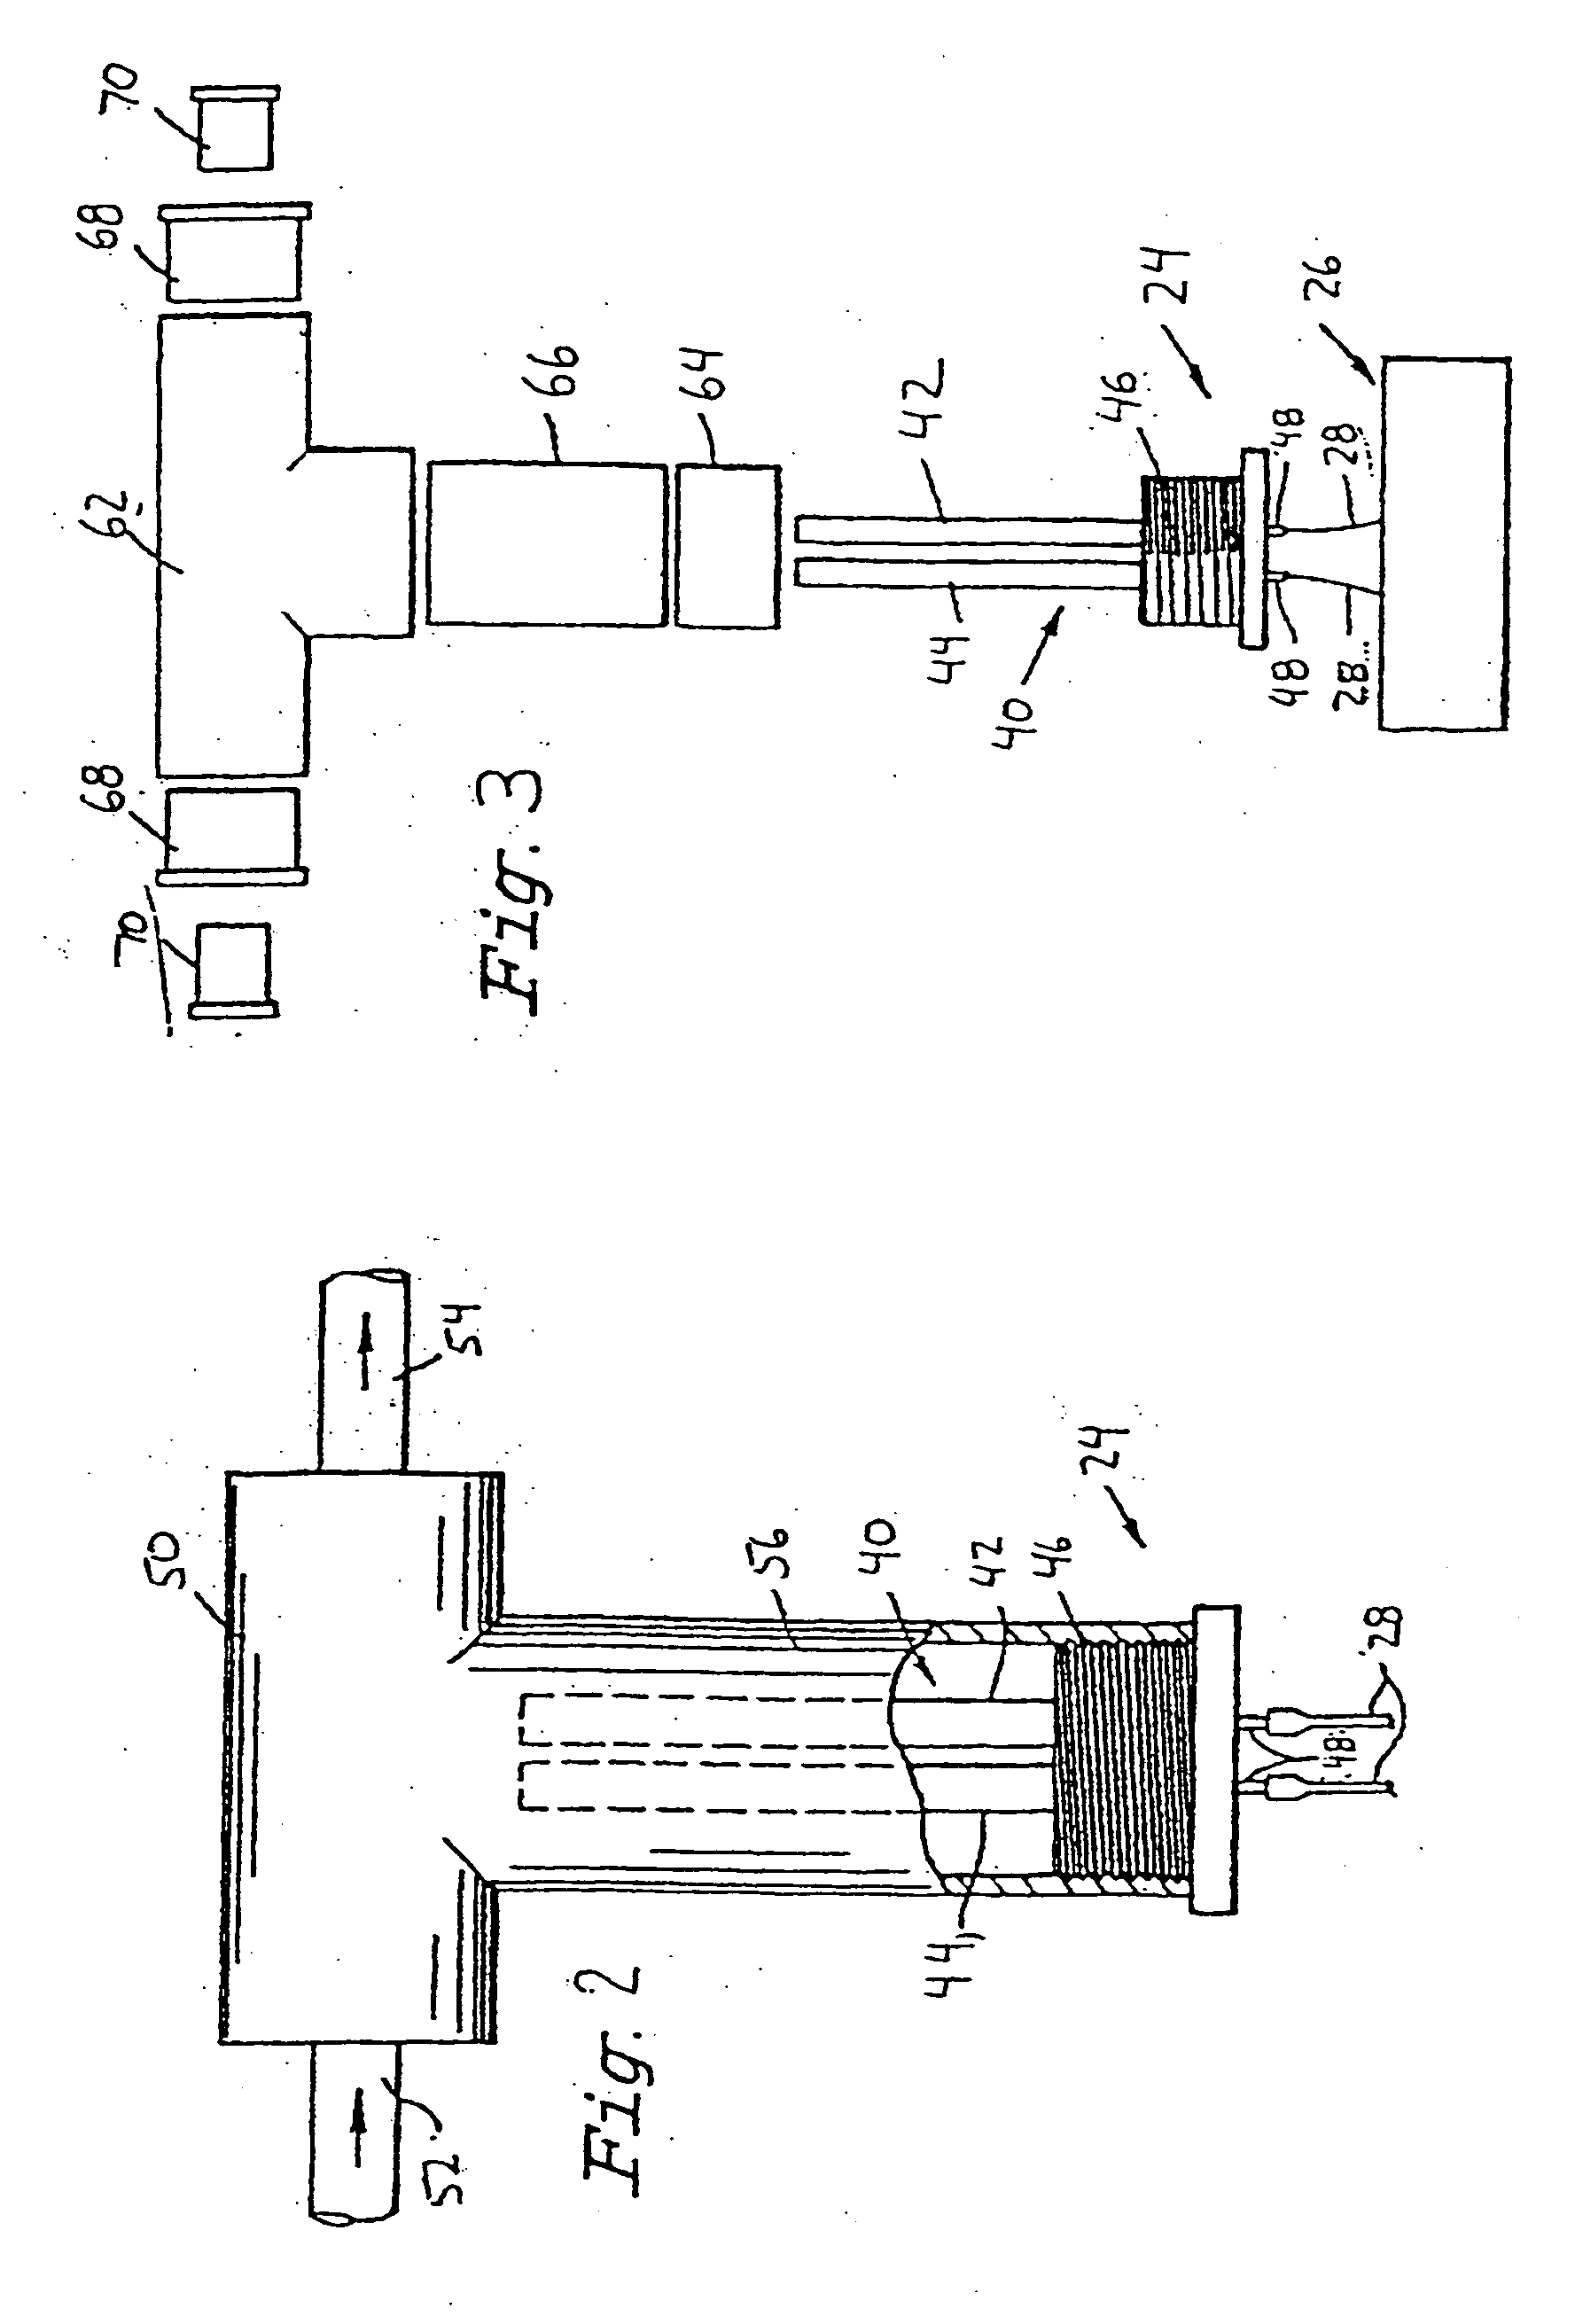 Recreational spas, sanitization apparatus for water treatment,and related methods